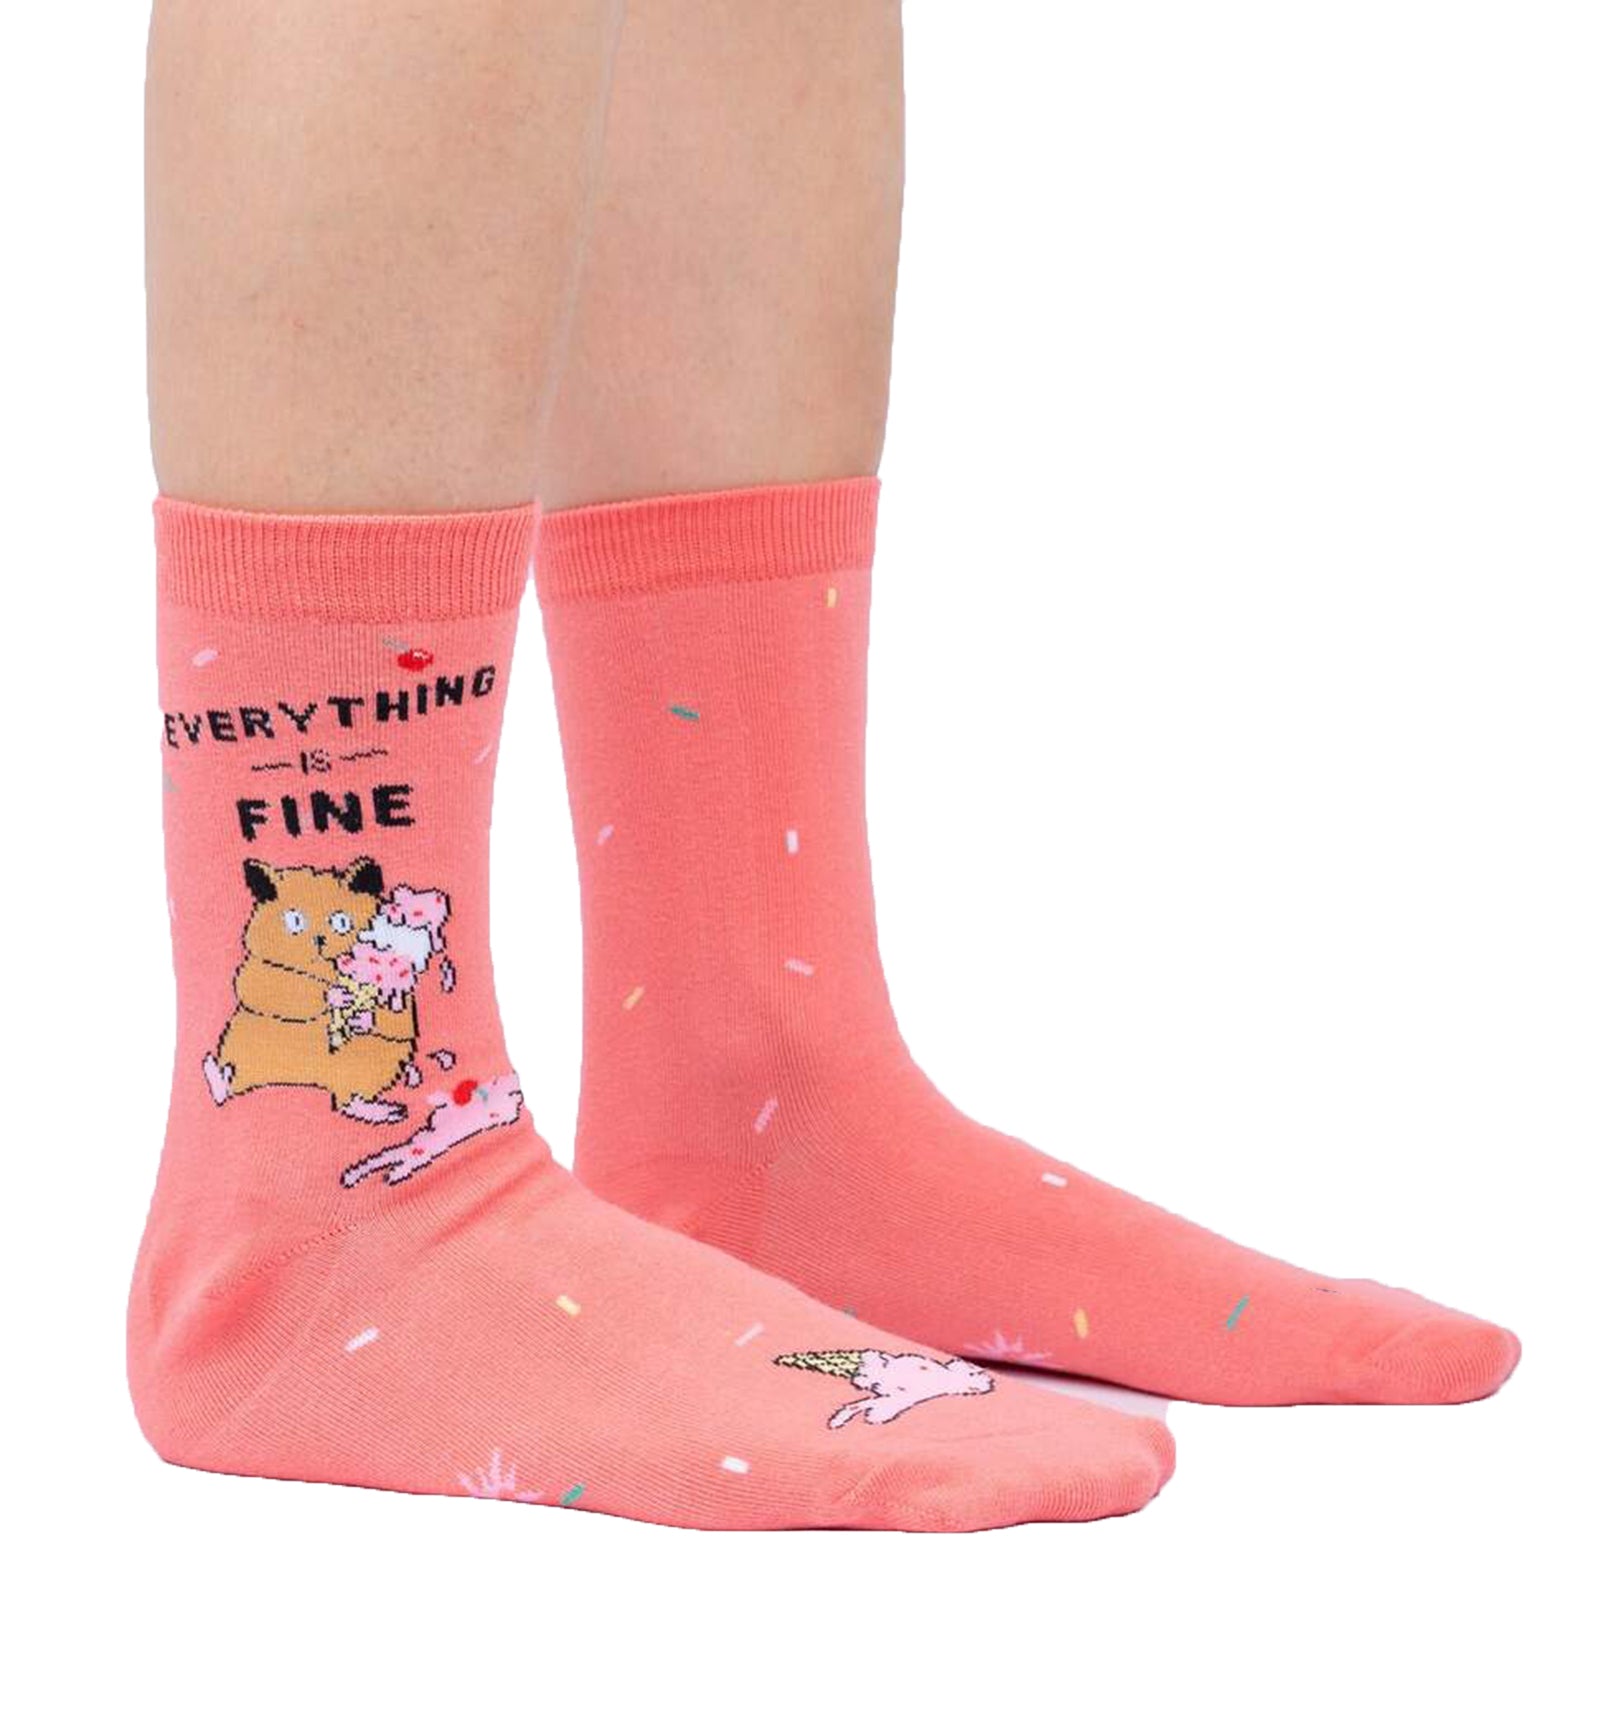 SOCK it to me Women's Crew Socks (W0435),Everything Is Fine - Everything Is Fine,One Size